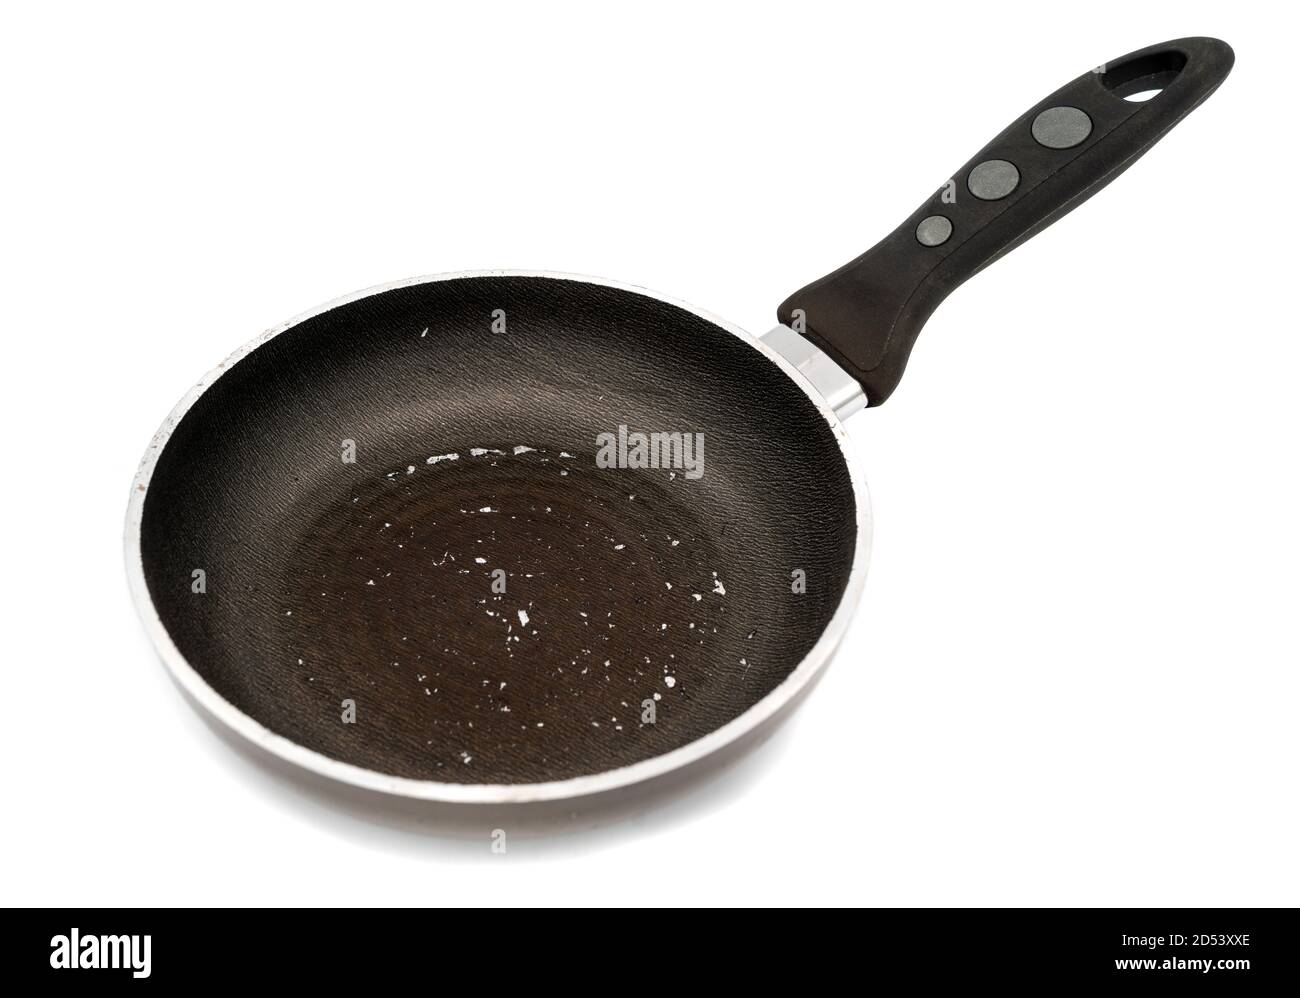 Damaged coating on non-stick frying pan with dangerous scratched teflon  Stock Photo - Alamy